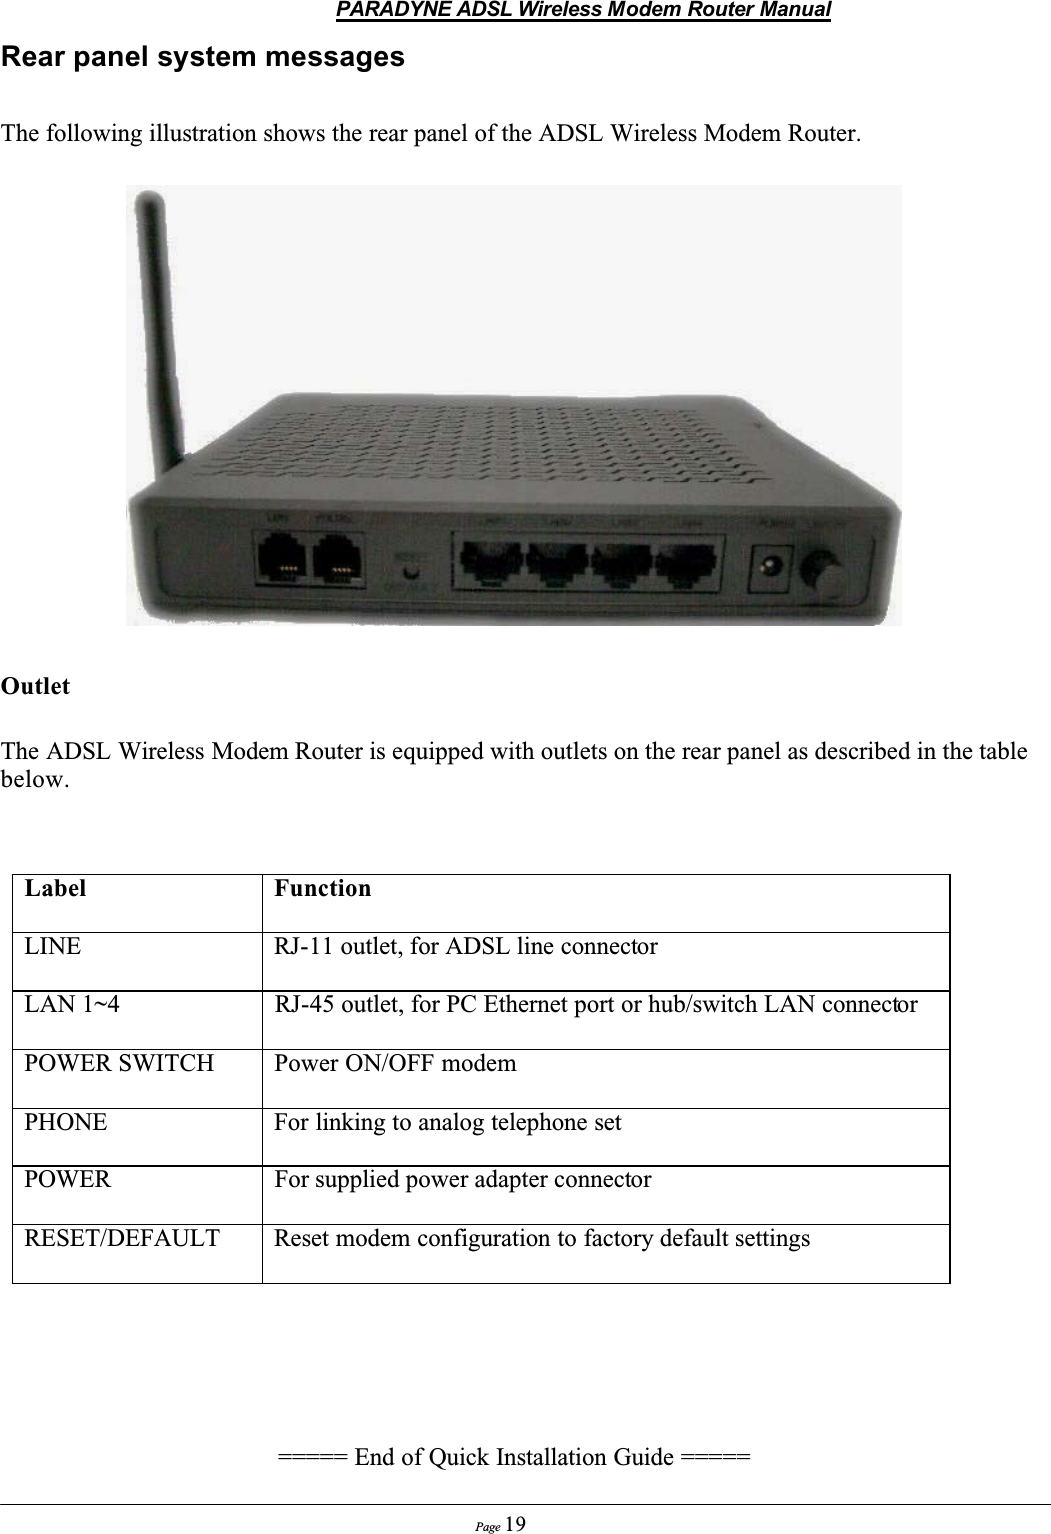 PARADYNE ADSL Wireless Modem Router ManualPage 19Rear panel system messagesThe following illustration shows the rear panel of the ADSL Wireless Modem Router.OutletThe ADSL Wireless Modem Router is equipped with outlets on the rear panel as described in the table below.Label FunctionLINE RJ-11 outlet, for ADSL line connectorLAN 1~4 RJ-45 outlet, for PC Ethernet port or hub/switch LAN connectorPOWER SWITCH Power ON/OFF modemPHONE For linking to analog telephone setPOWER For supplied power adapter connectorRESET/DEFAULT Reset modem configuration to factory default settings===== End of Quick Installation Guide =====